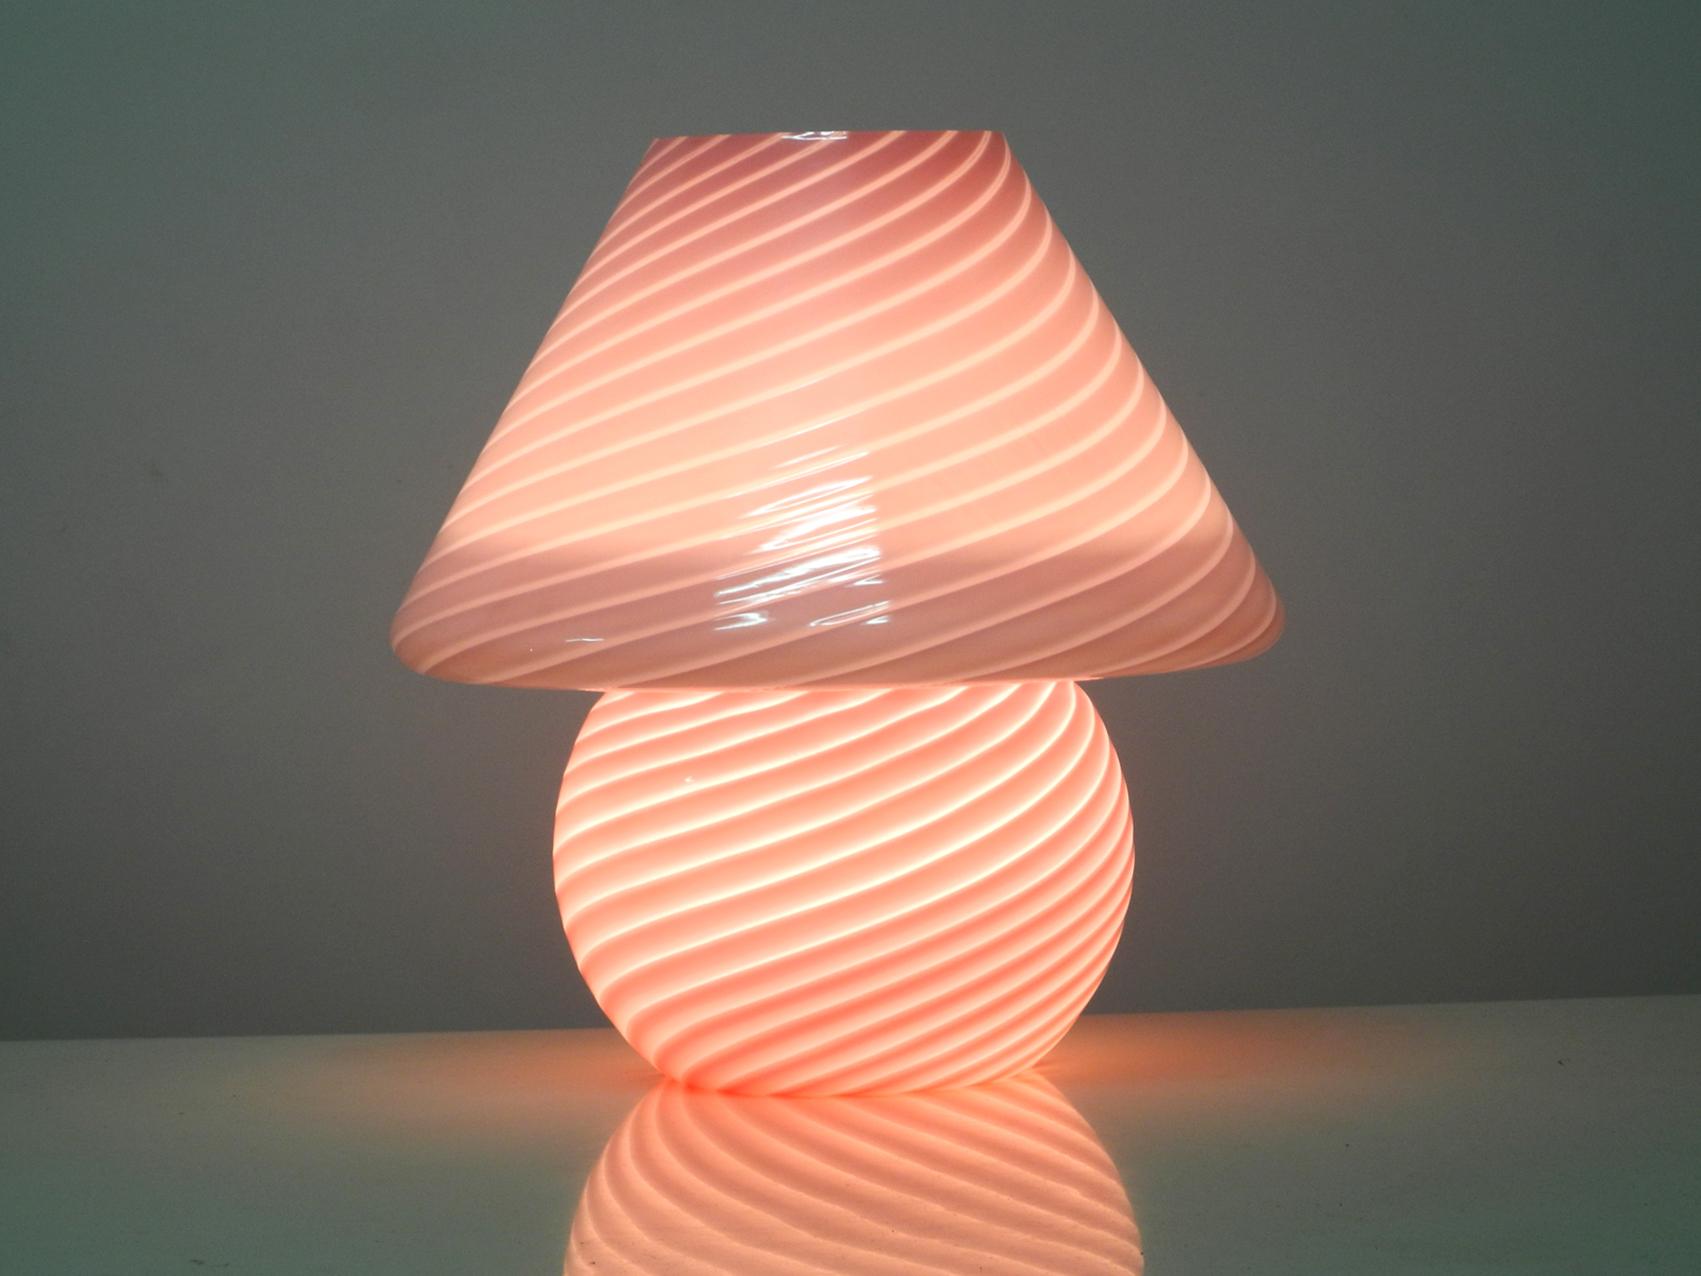 Beautiful very elegant 1960s large Vetri pink Murano glass table lamp. 
Manufacturer is Vetri. Made in Italy. Great design. 
Foot and shade are made of one piece of pink Murano glass with some stripes. 
One original E27 socket with original cable